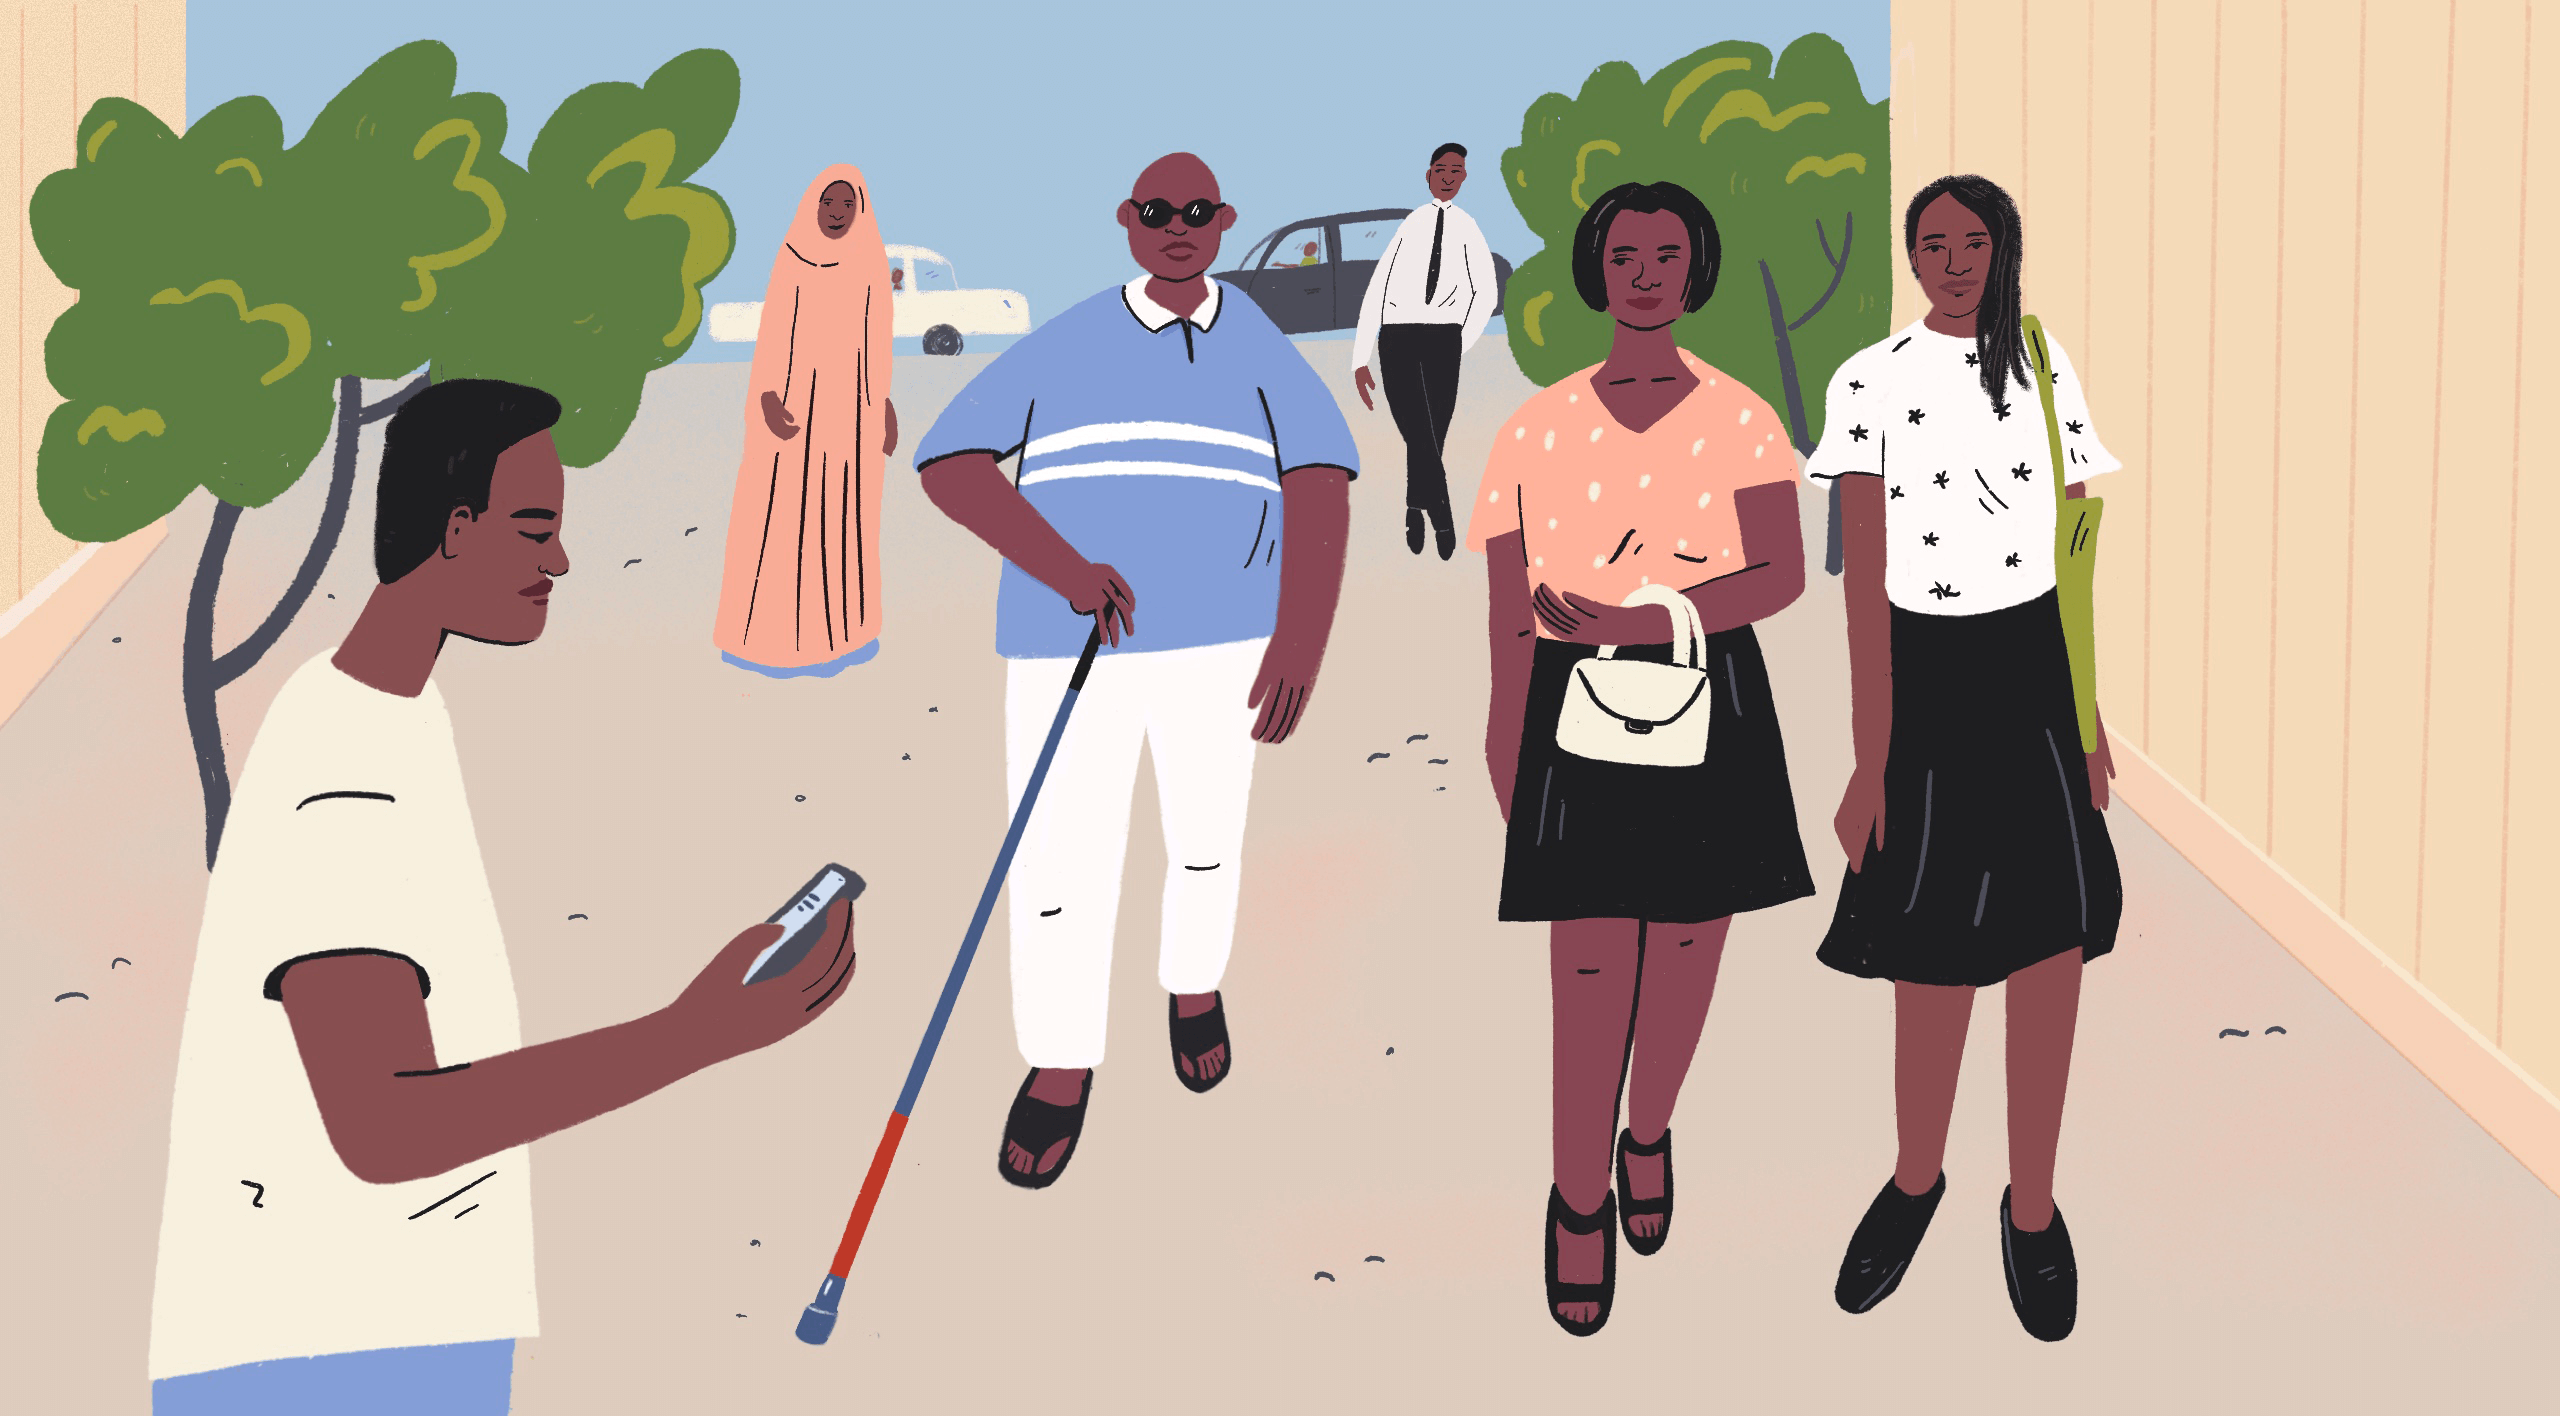 Several people walk down a street in Nigeria, a young man, two women side by side, one man has a walking stick and sunglasses.